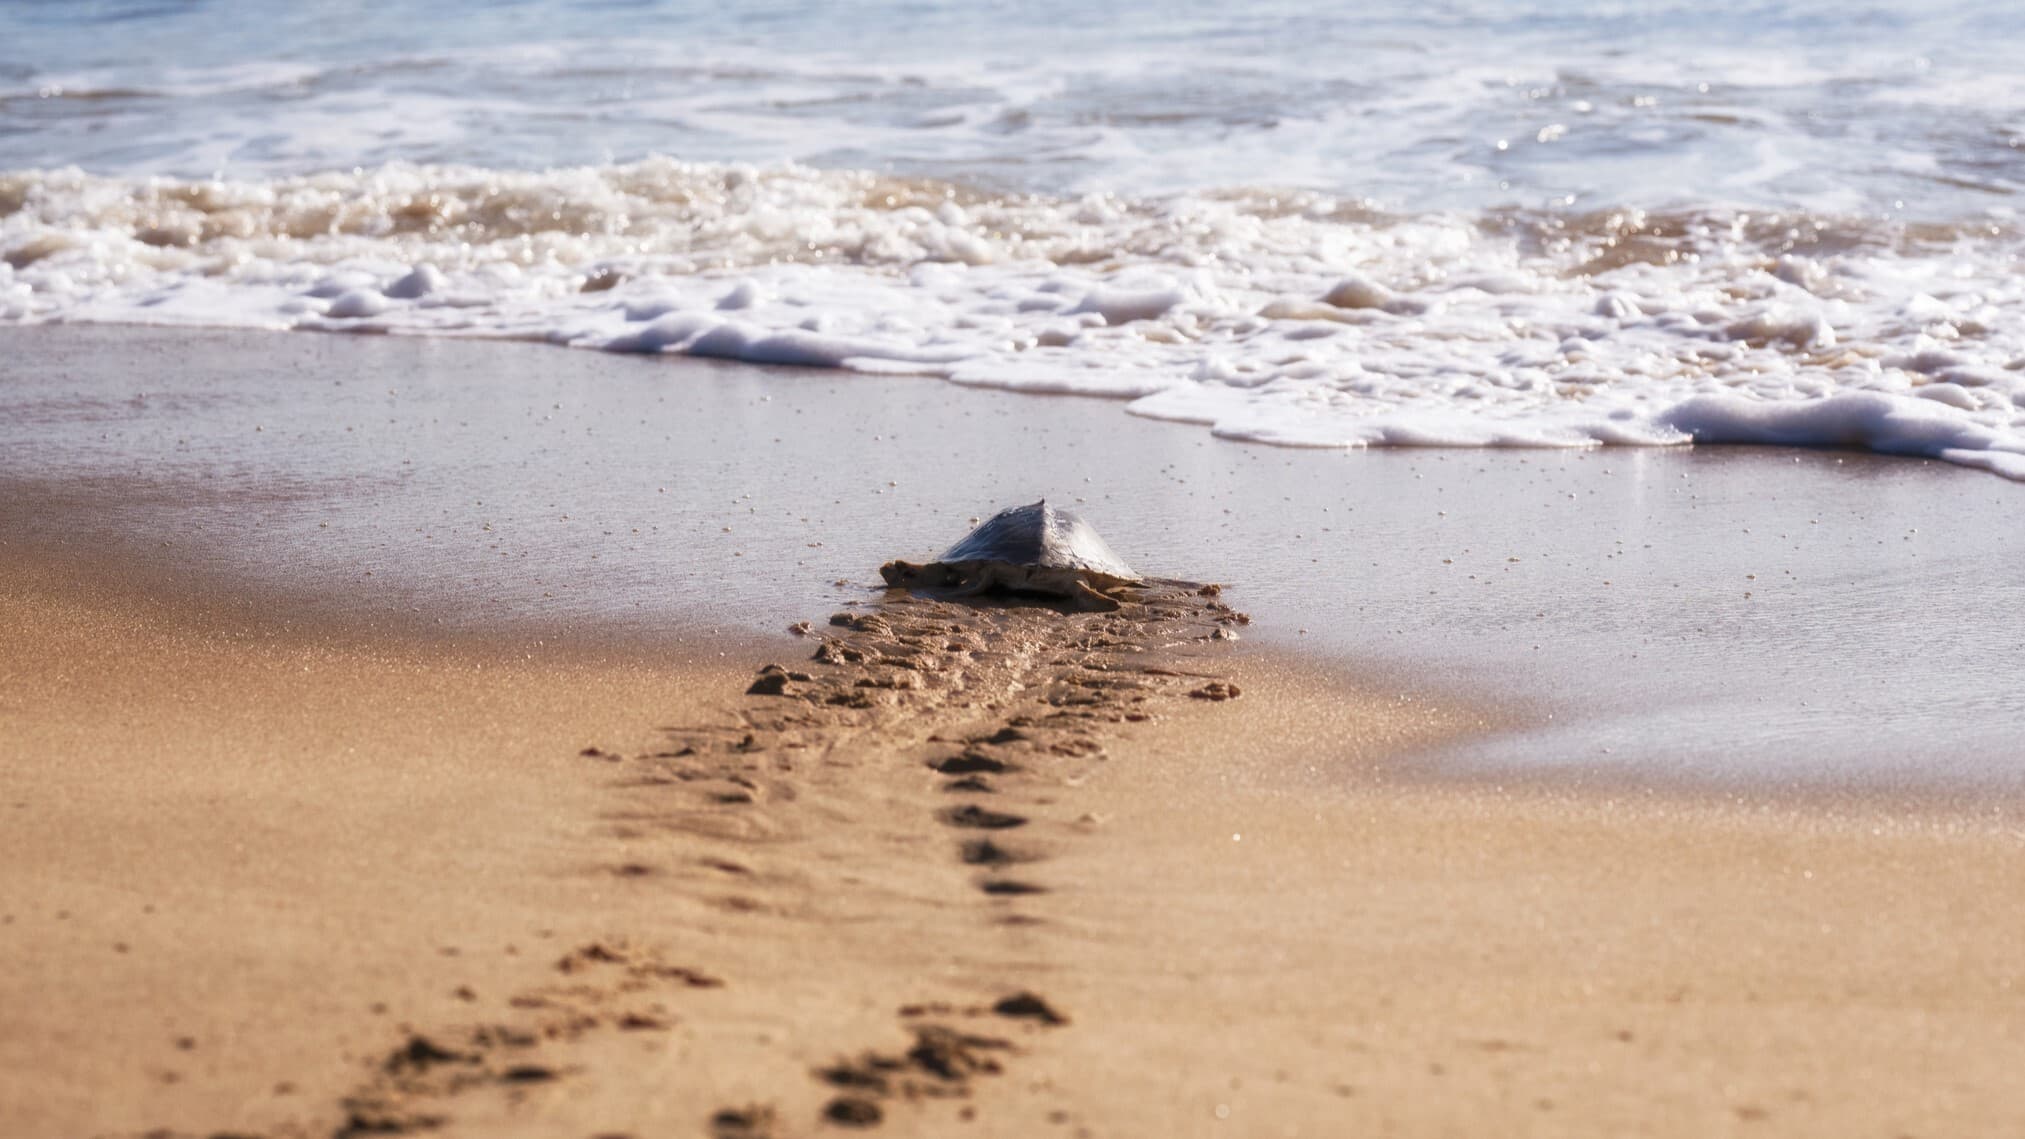 Sea turtle leaves tracks in the sand as it returns to the ocean